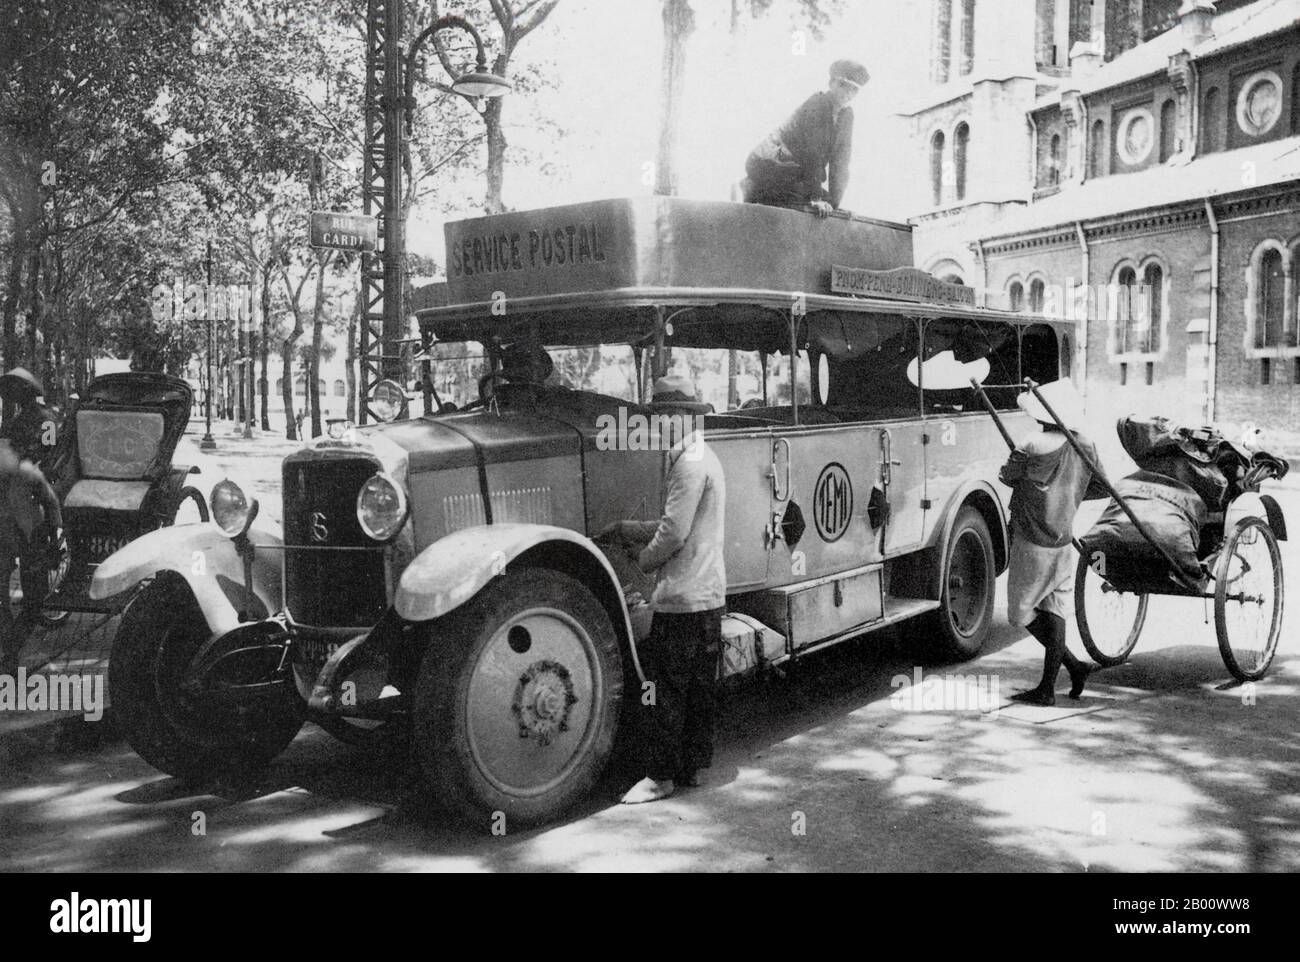 Cambodia/Vietnam: A 1927 photograph of a postal service vehicle which delivered mail between Phnom Penh and Saigon.  Situated on the banks of the Tonle Sap, Mekong and Bassac rivers, Phnom Penh is an ideal location for a trading centre and capital city. It is today home to more than 2 million of Cambodia's 14 million population. Phnom Penh first became the capital of Cambodia after Ponhea Yat, the last king of the Khmer Empire, was forced to flee Angkor Thom after it was seized by the Siamese army in 1393. Phnom Penh remained the royal capital until 1505 when it was abandoned for 360 years. Stock Photo